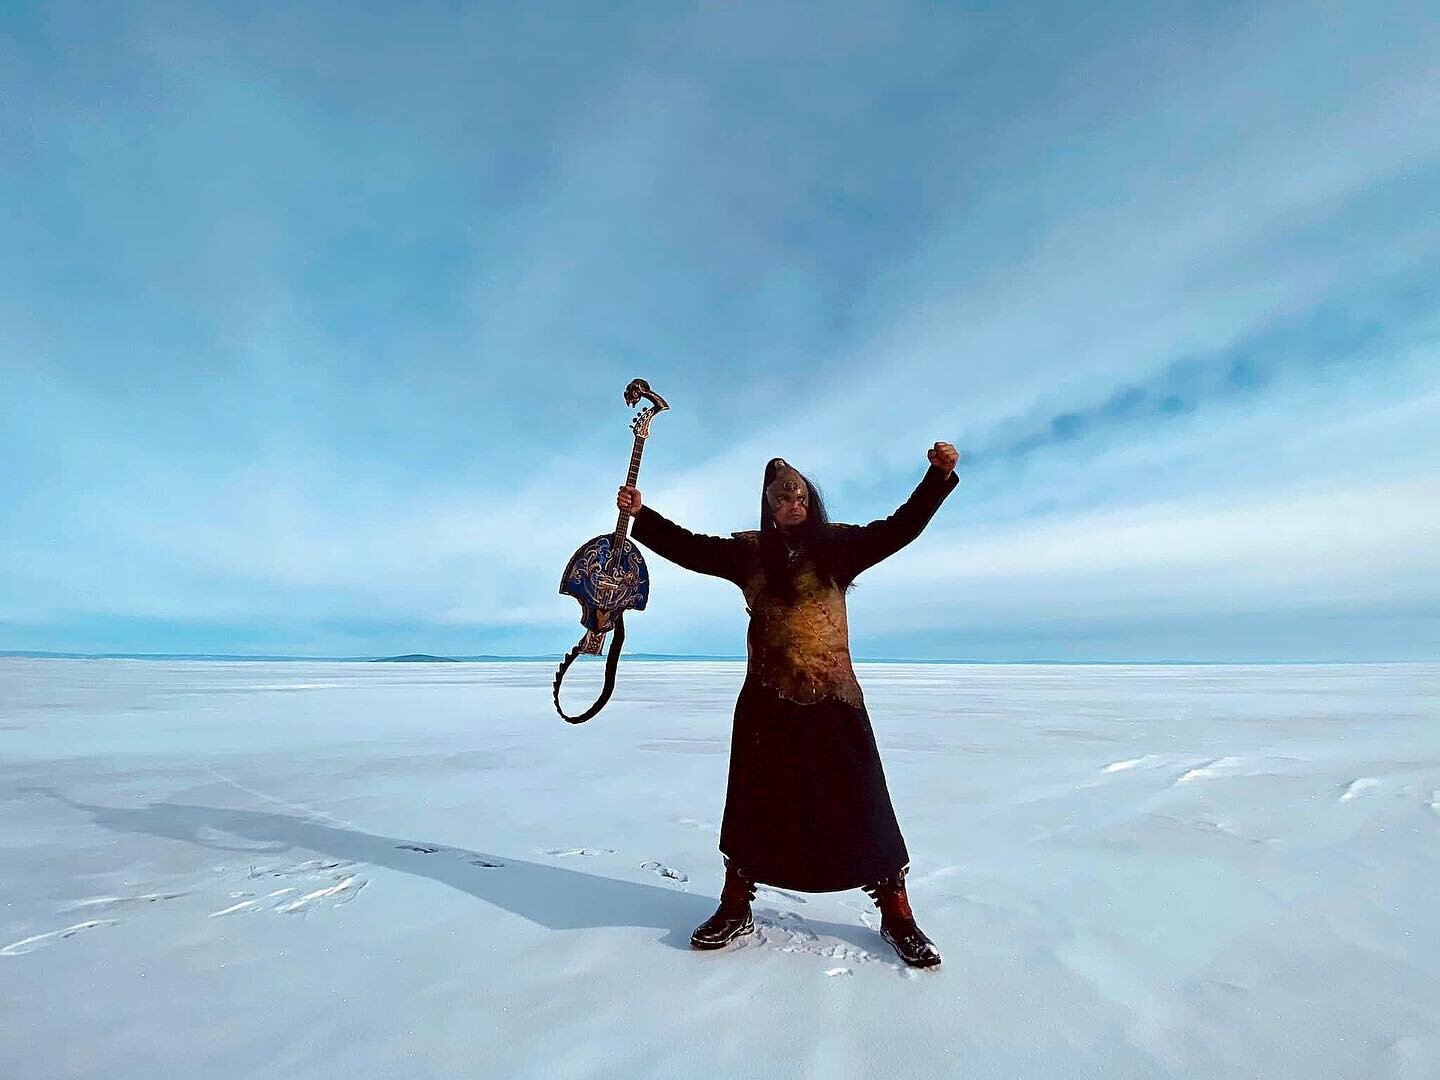 If you ever visit Mongolia, make sure to see the breathtaking Lake Khuvsgul in the winter. Uuhai!
.
.
.
#mongolianrock #mongolrock #uuhai #tovshuur #mongolianmusic #lakekhuvsgul #mongolia #visitmongolia